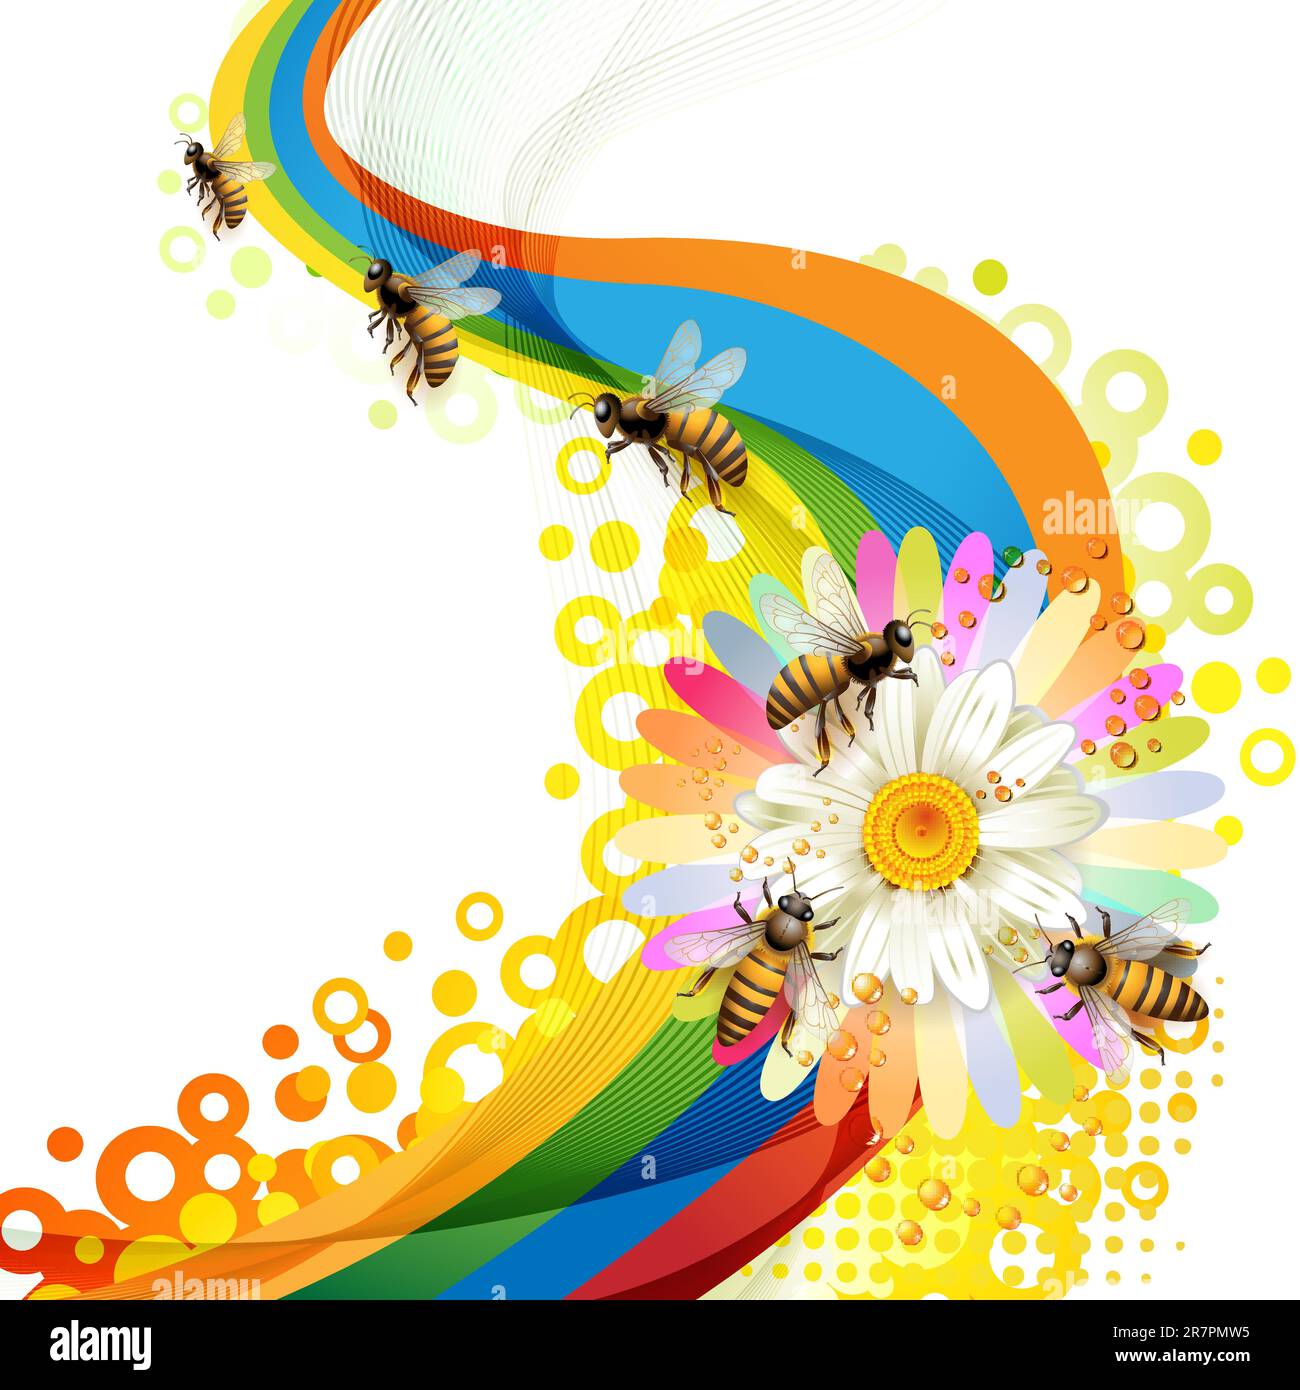 Bees over colorful background with flower Stock Vector